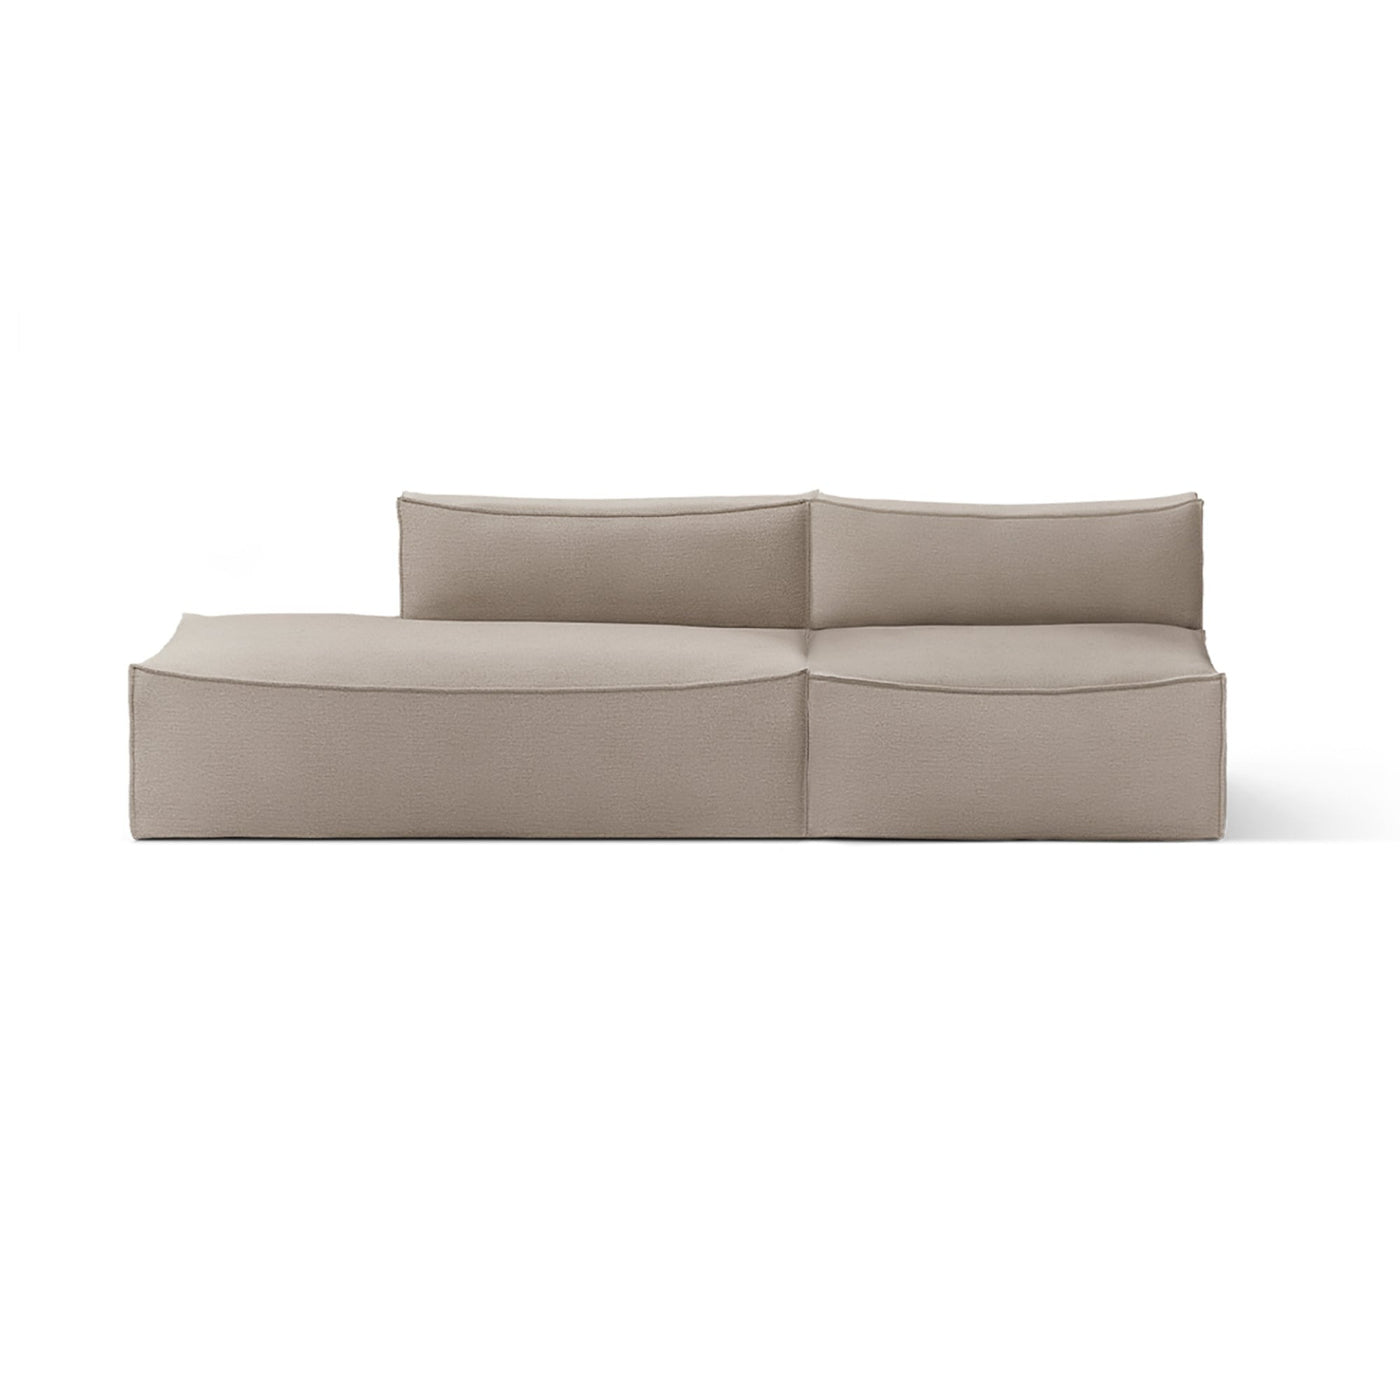 Ferm LIVING Catena Modular 2 Seater sofa. Made to order at someday designs #colour_cotton-linen